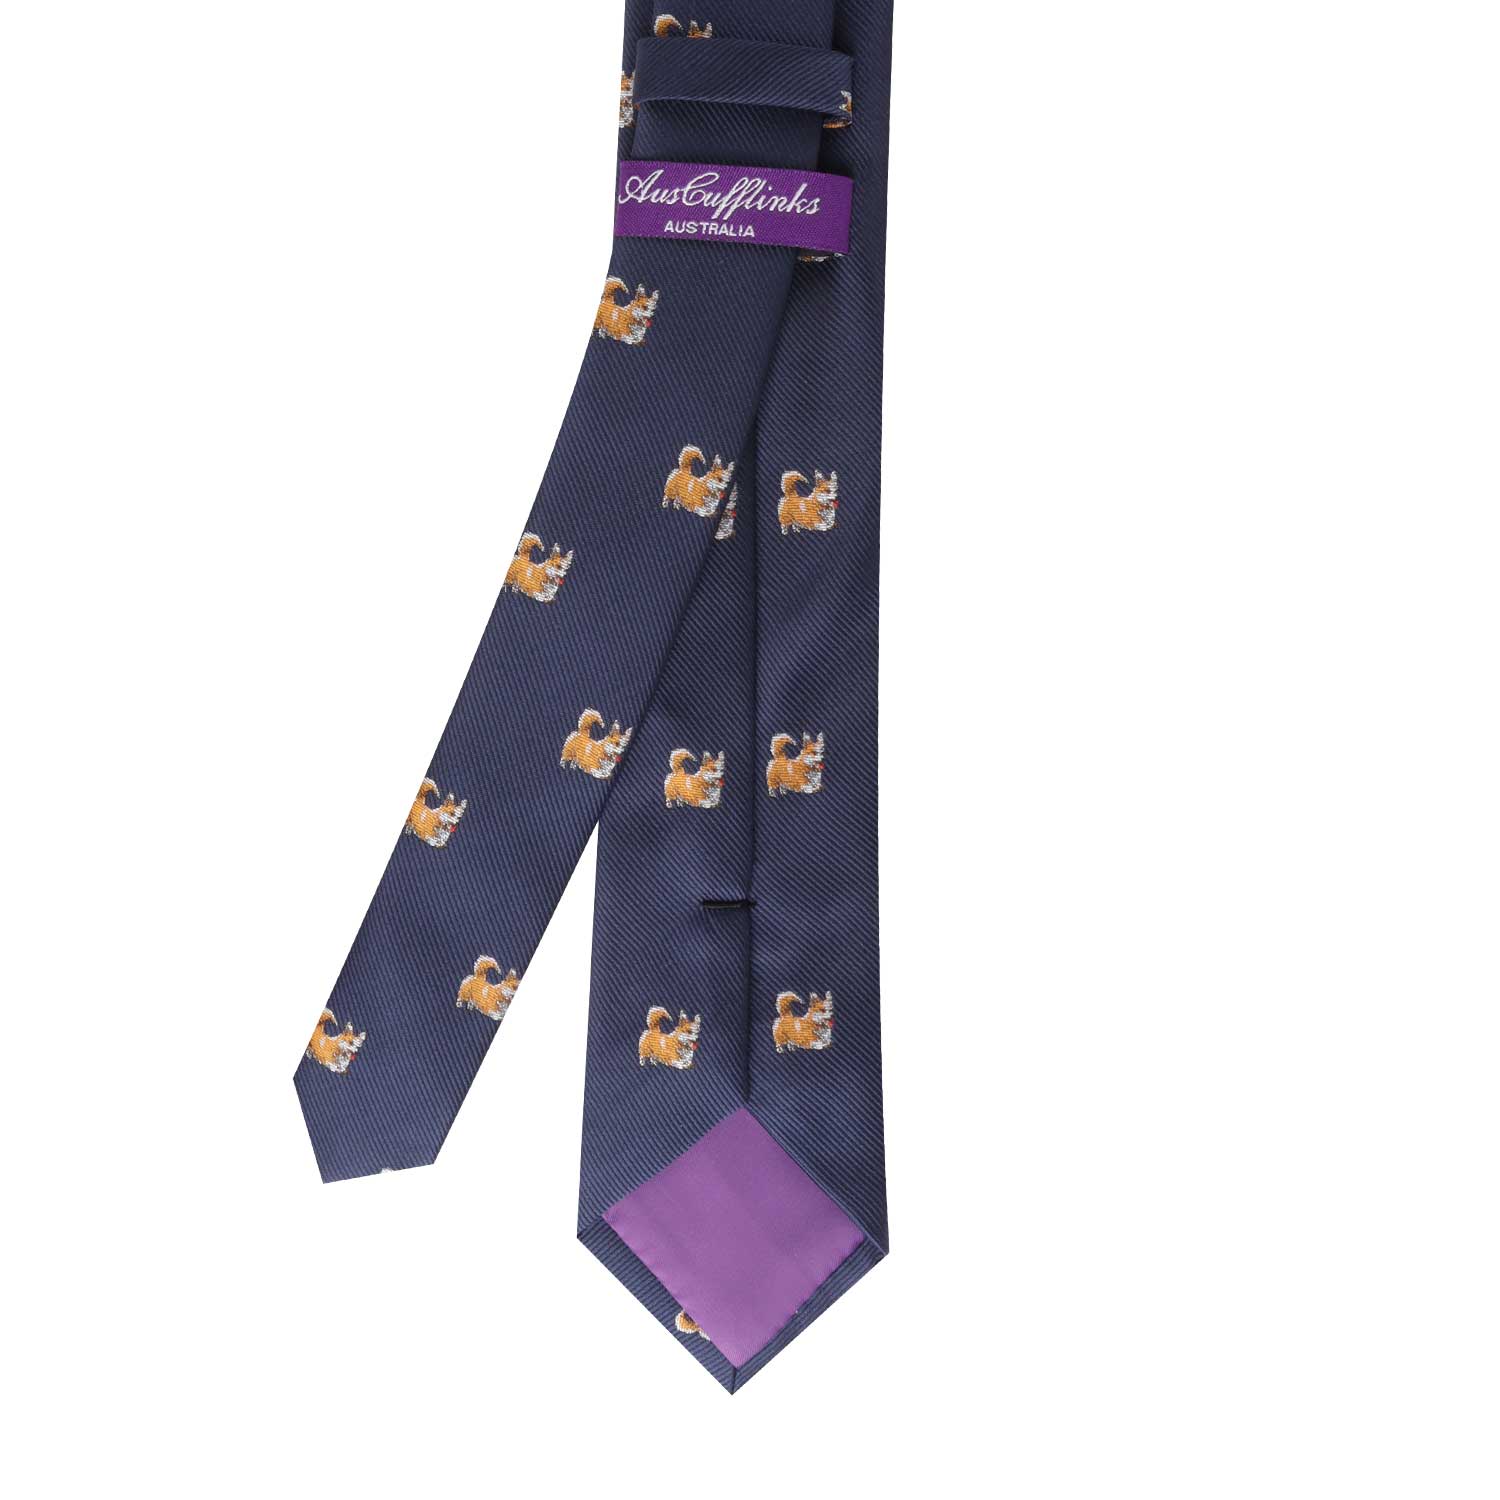 A necktie with charming corgi dogs on it.